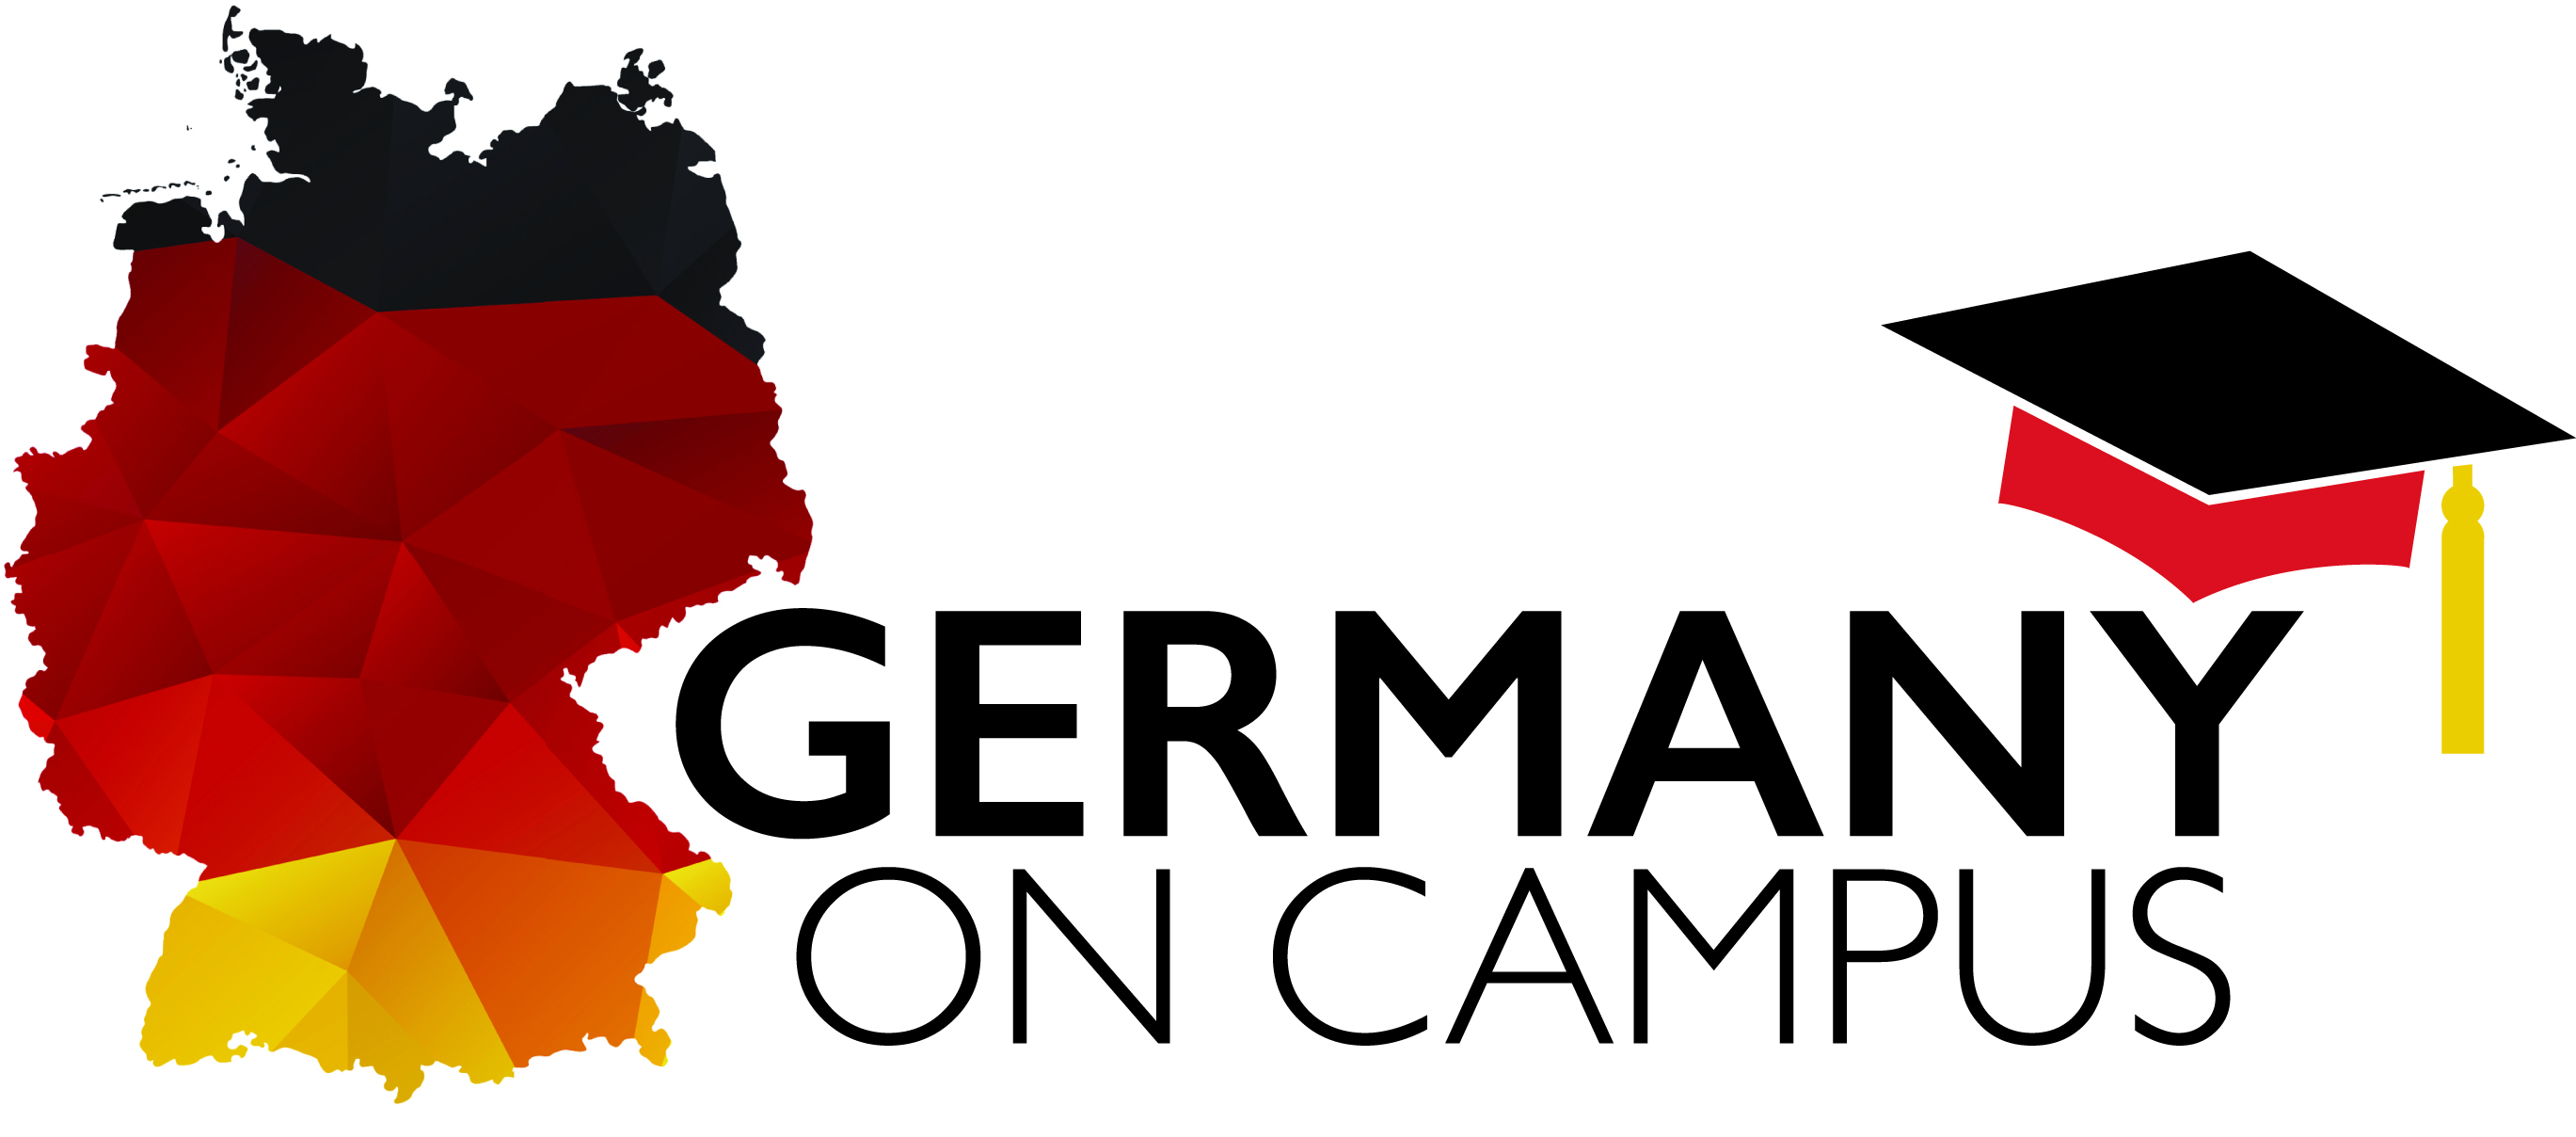 Students at UNA will have an opportunity to interact with representatives from Germany and German companies at a special event scheduled for Oct. 17.